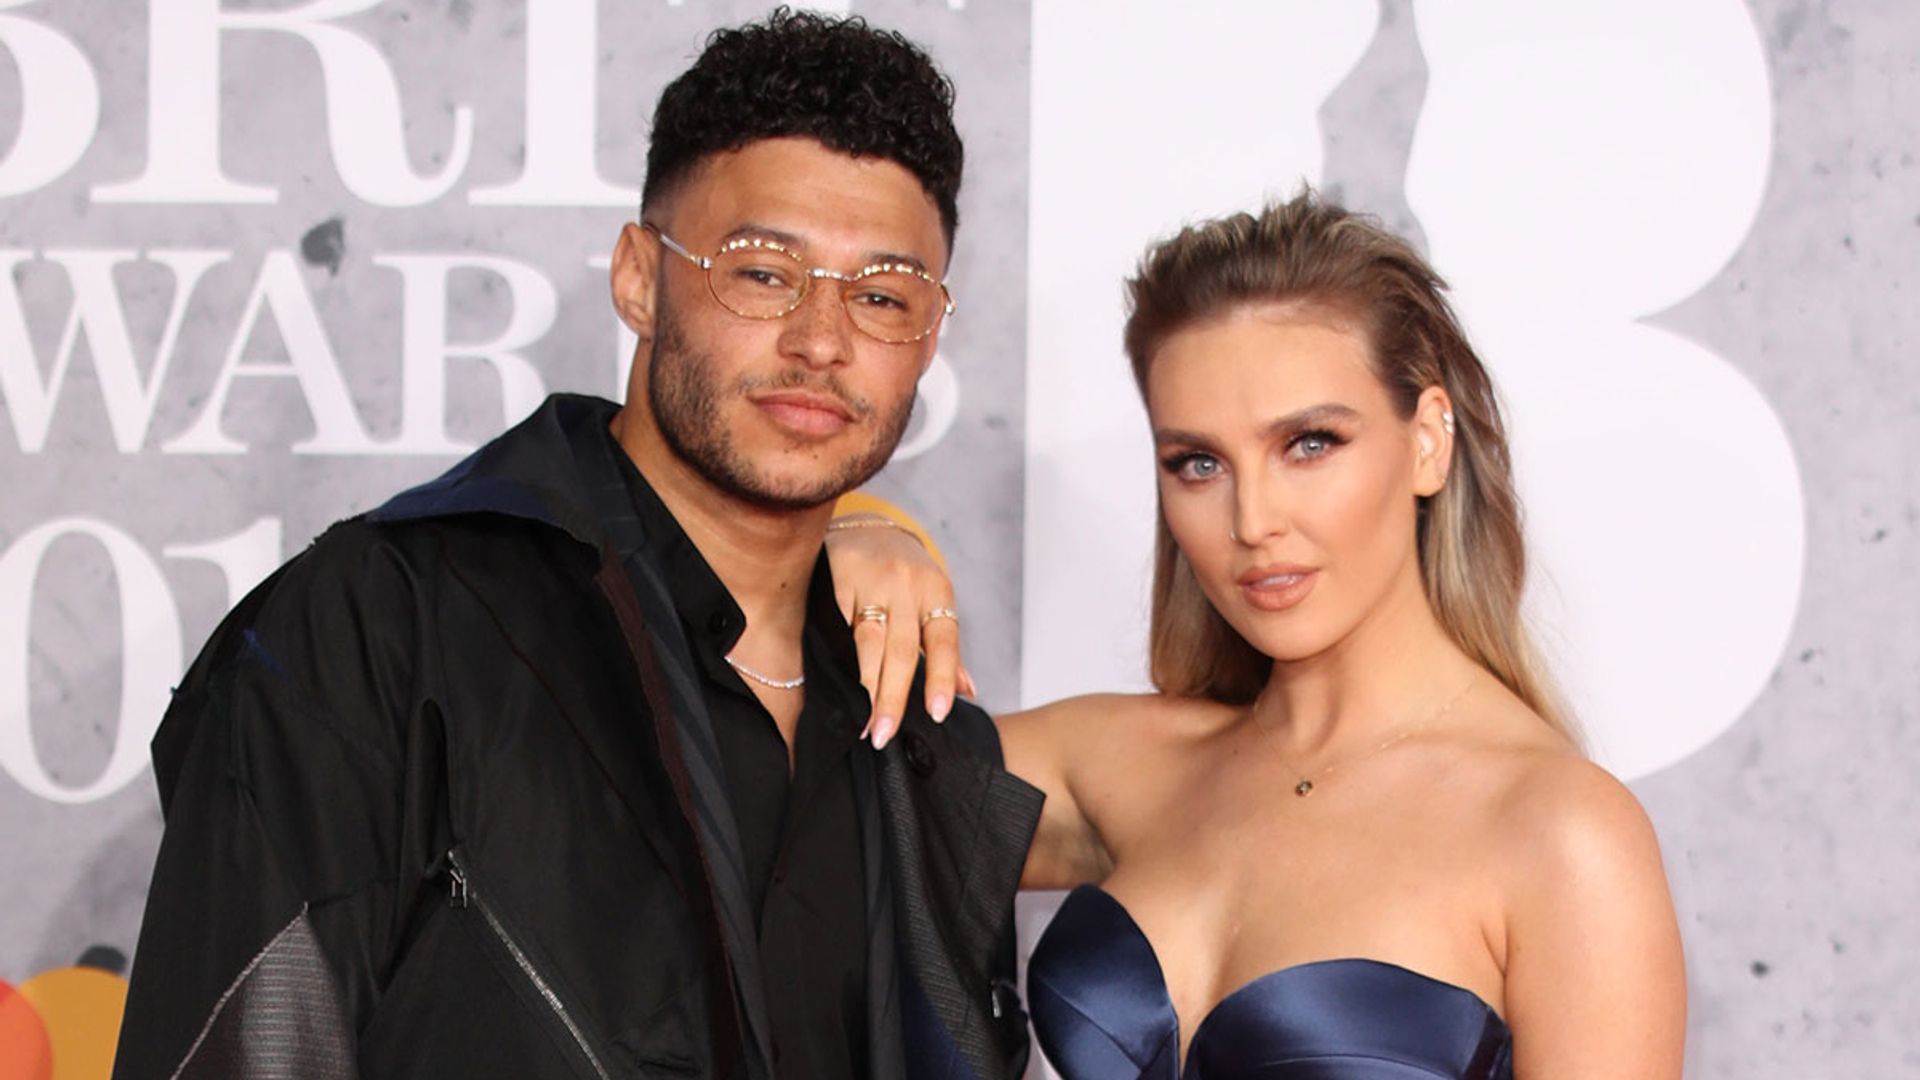 Little Mix's Perrie Edwards and Alex Oxlade-Chamberlain announce arrival of their first child